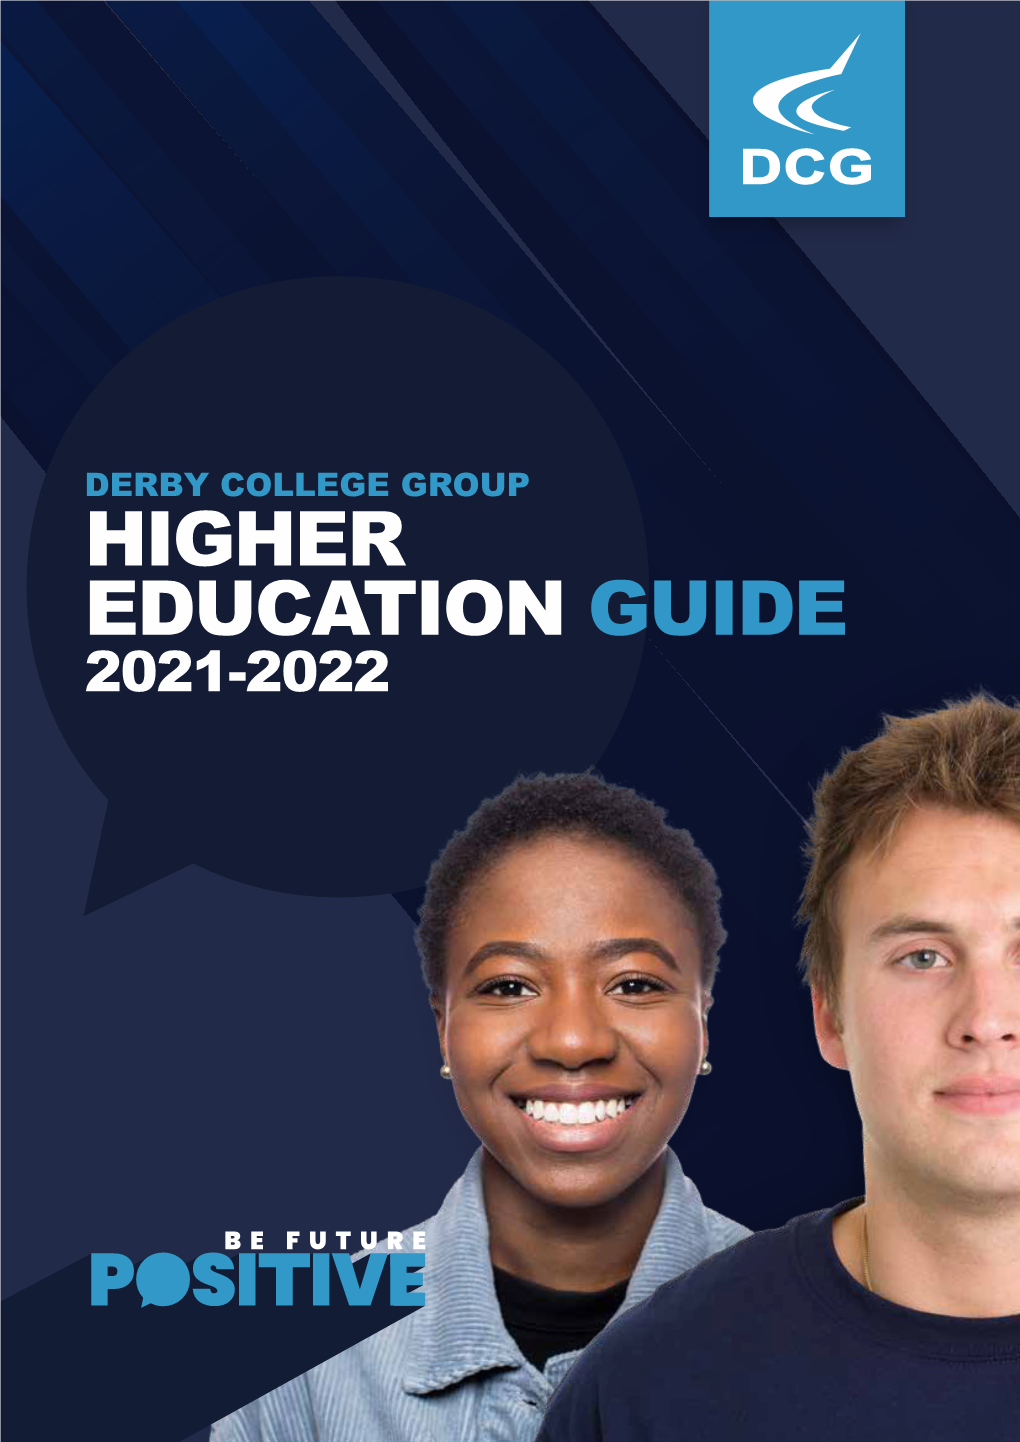 Derby College Group Higher Education Guide 2021-2022 Contents